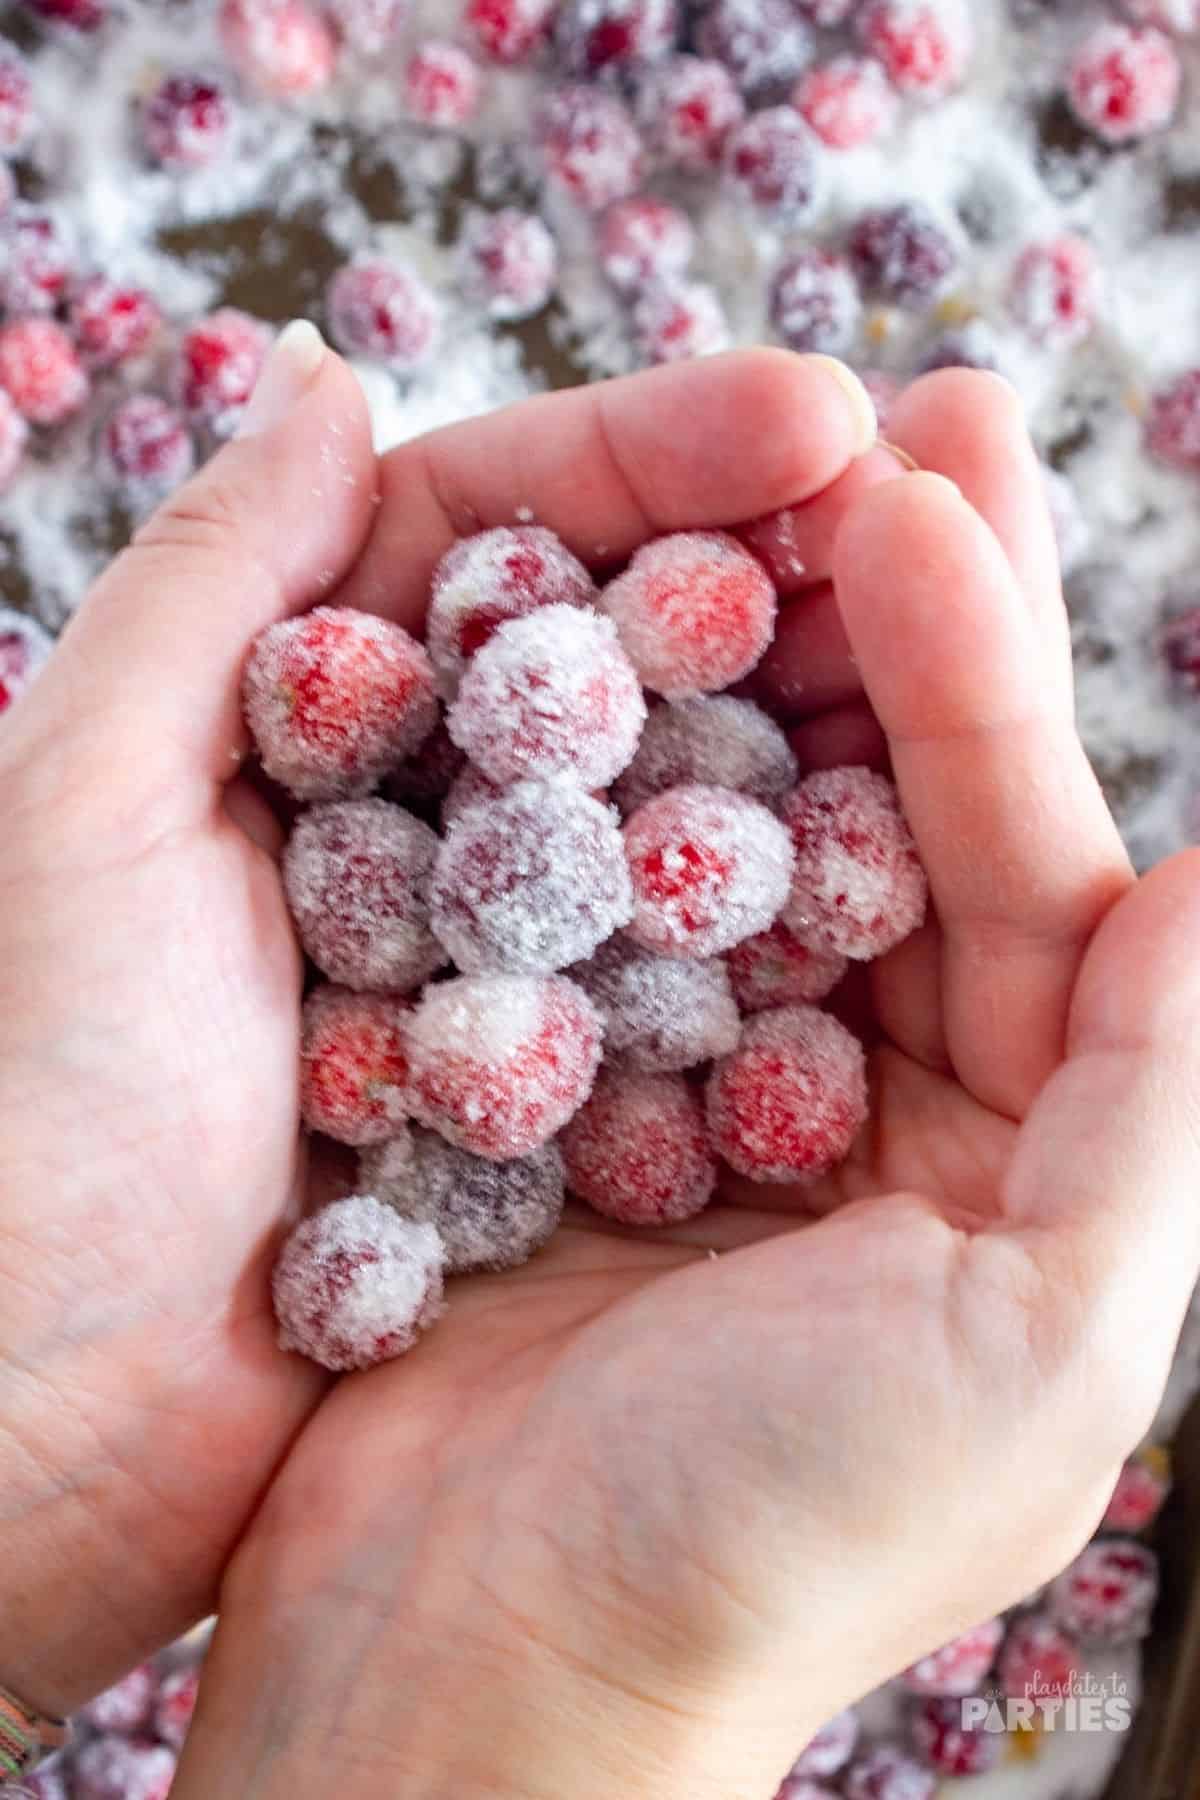 Orange vanilla candied cranberries are sweet and sour little bits of deliciousness that everyone in the family will enjoy.